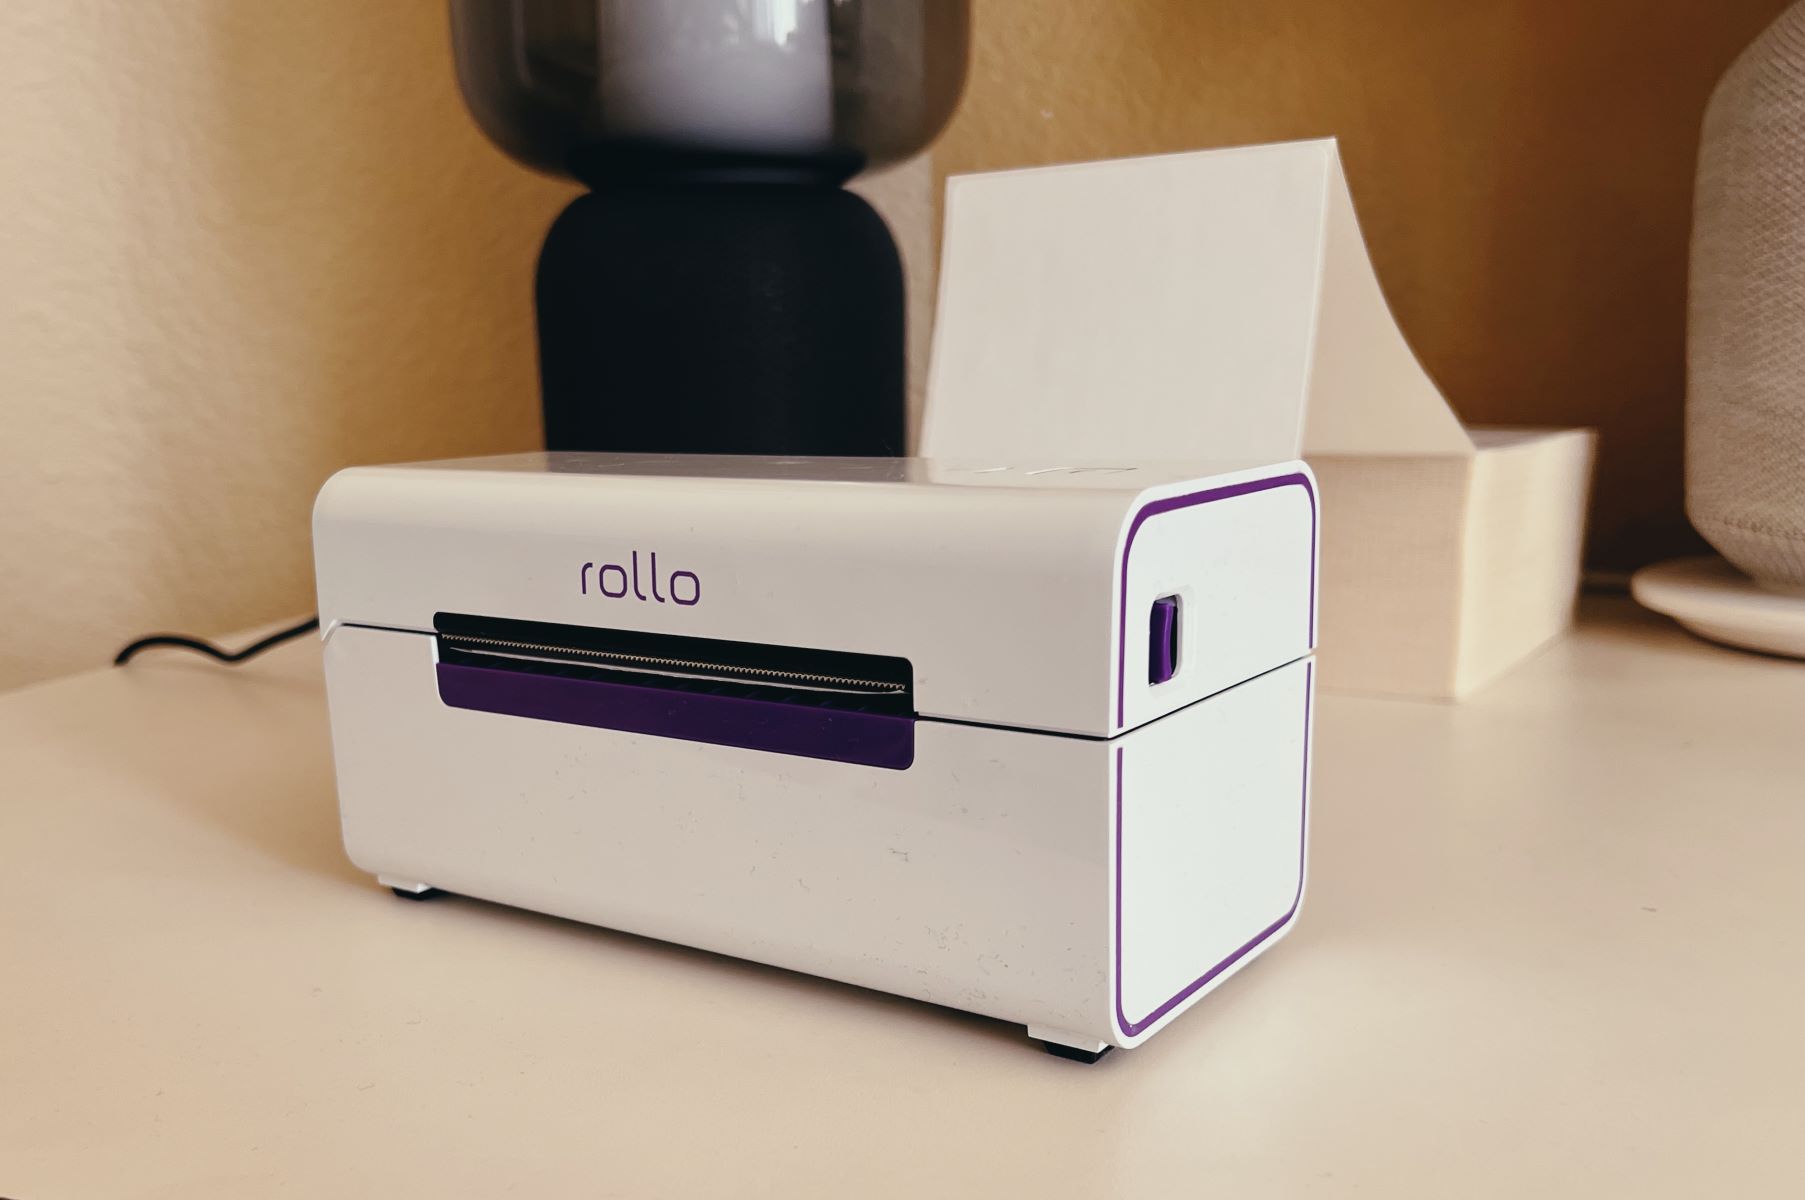 How To Set Up A Rollo Printer